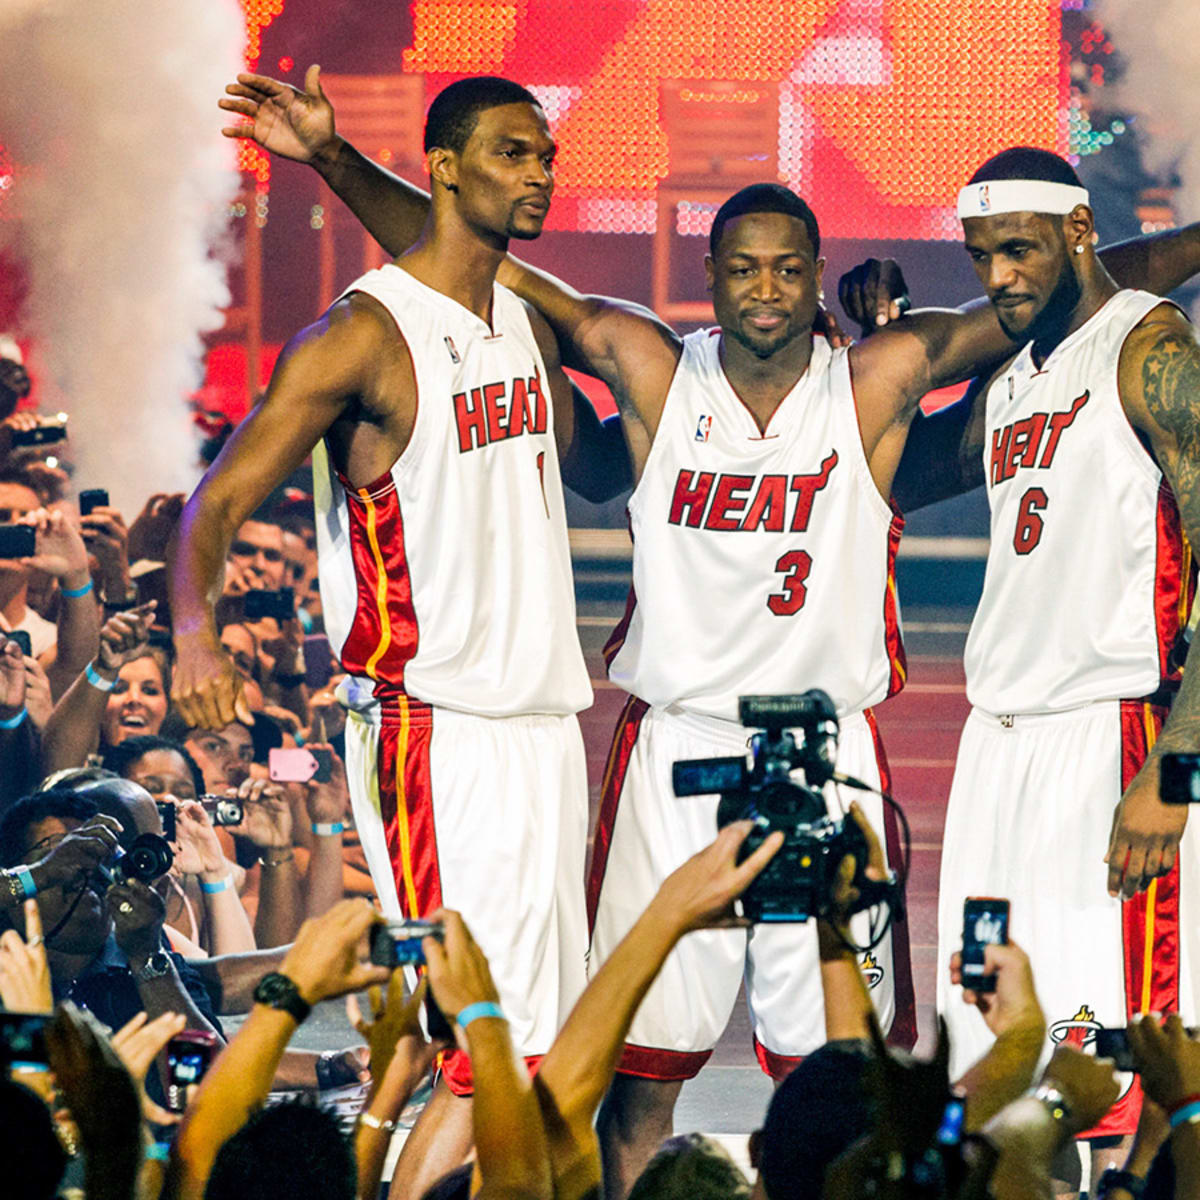 The Legacy Of LeBron James: His Miami Heat Jersey Number 6